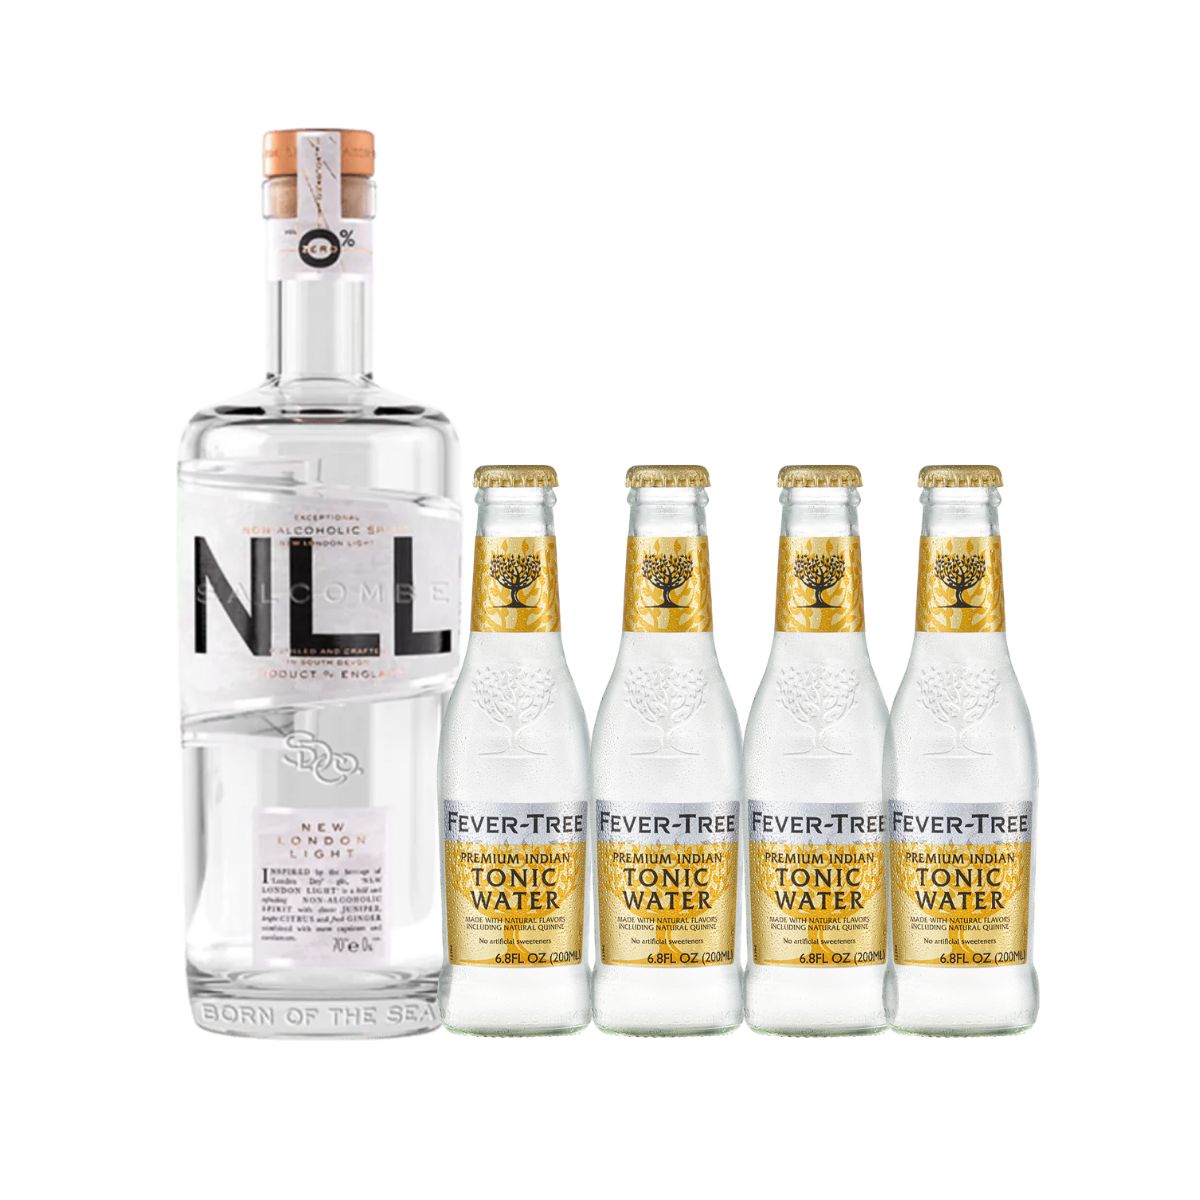 New London Light First Light Non-Alcoholic Gin